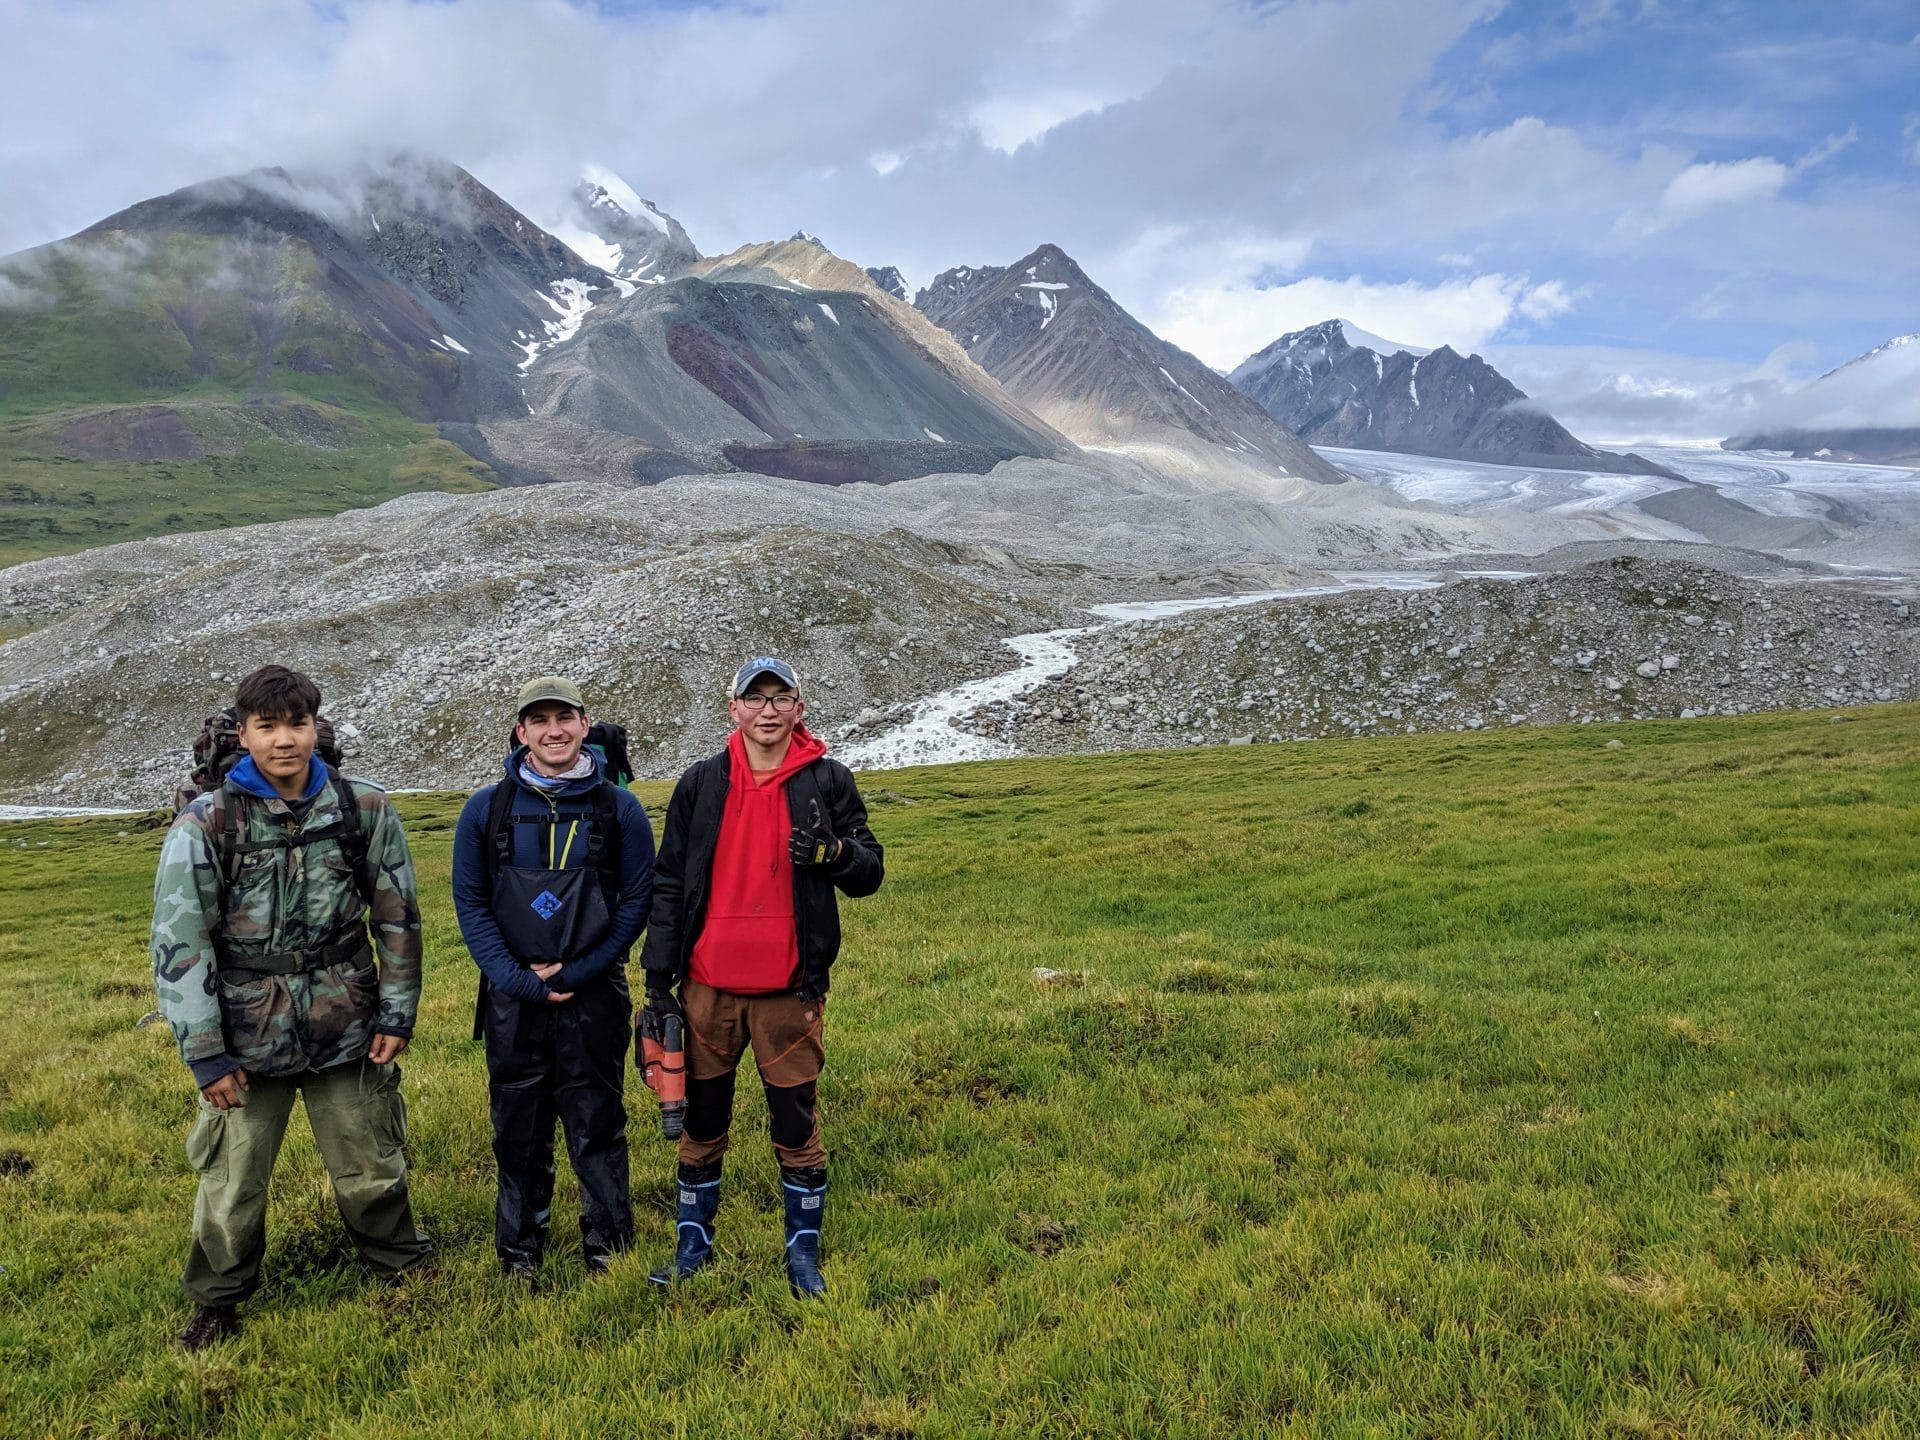 Team members Tumur Batbold, Peter Strand, and Oraza Seribol stand at the verdant edge of the Potanin glacier valley. The hills of tumbling rocks reveal young moraines.